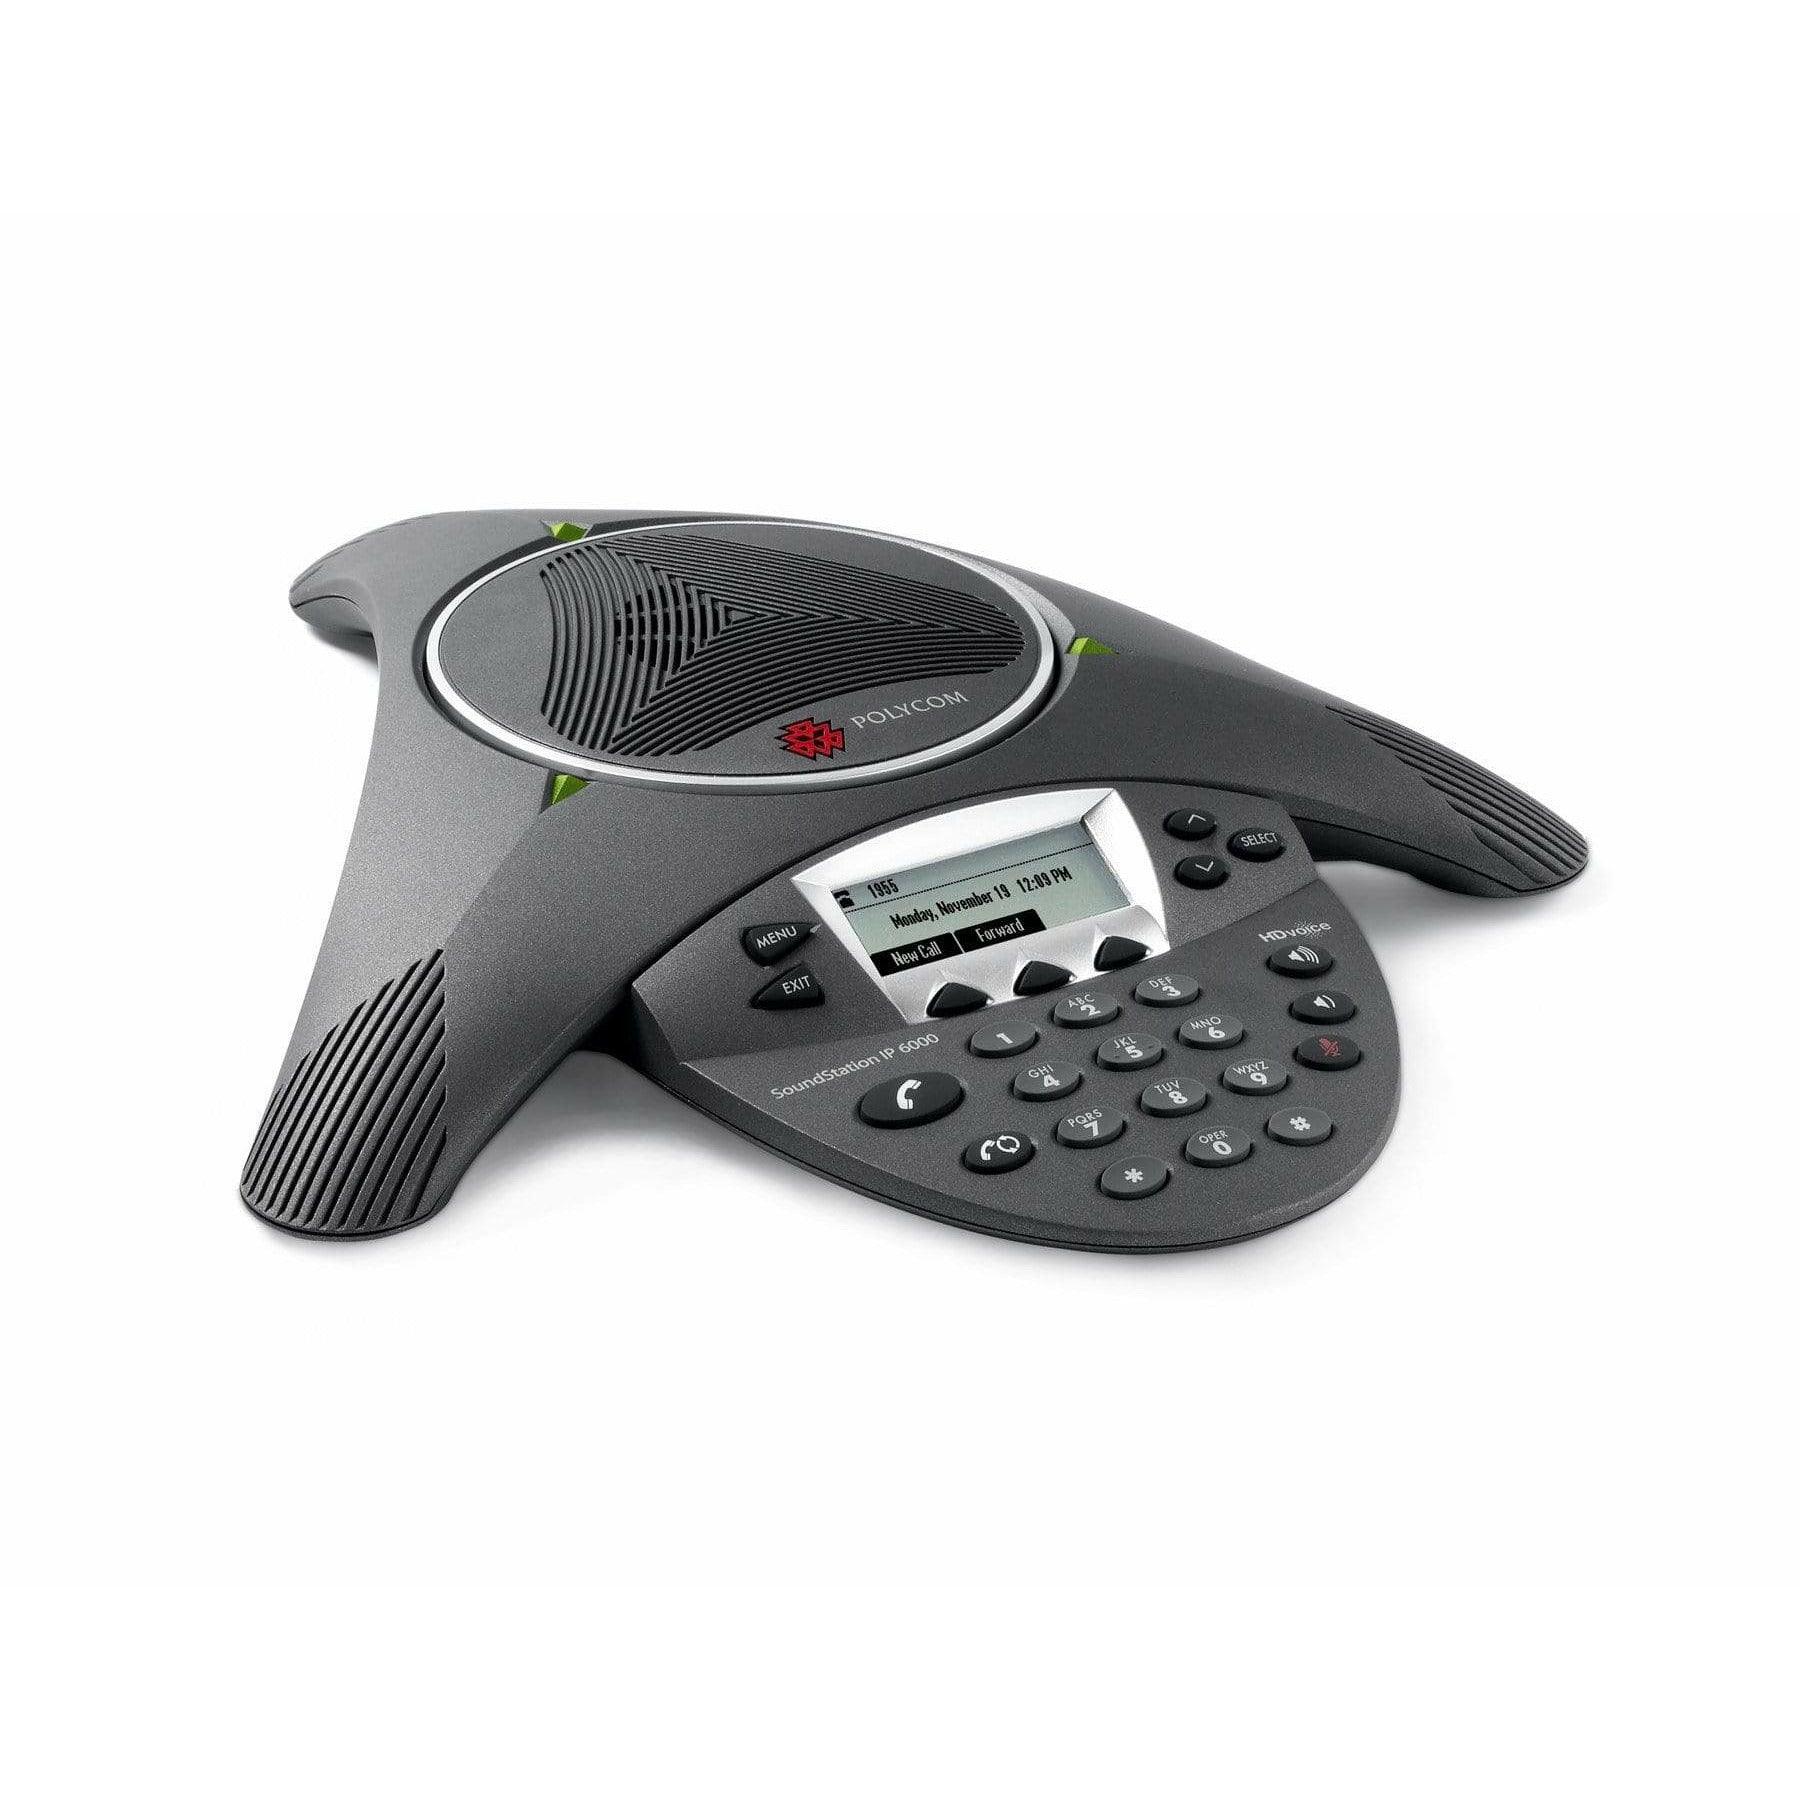 Polycom SoundPoint IP6000 Conference Phone - 2200-15600-001 New - POLY-IP6000 - Reef Telecom